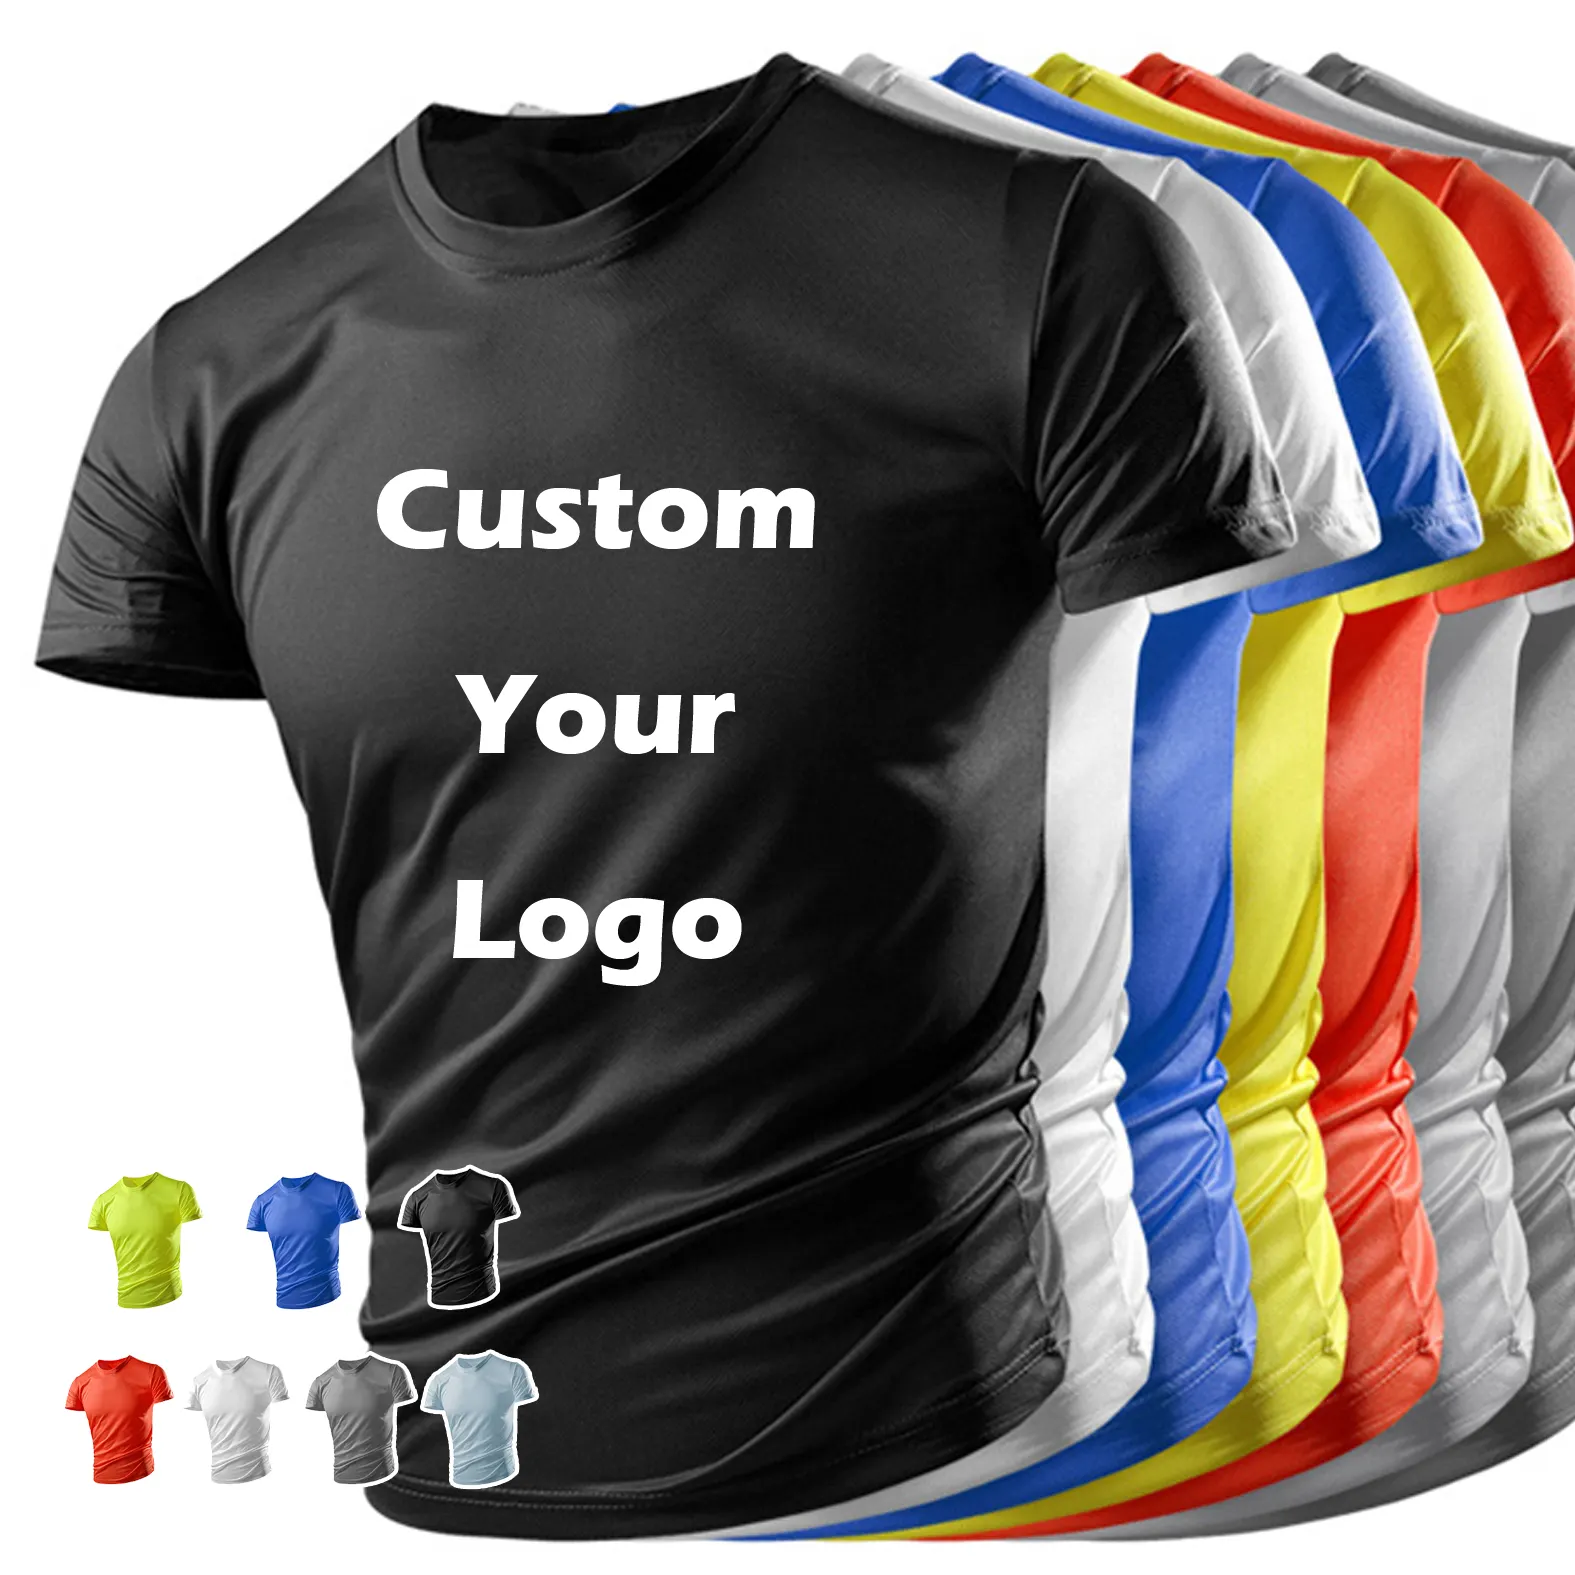 Plain men's t shirt Polyester tee quick dry fit tshirts custom sublimation printing logo unisex gym Sports t-shirts for men